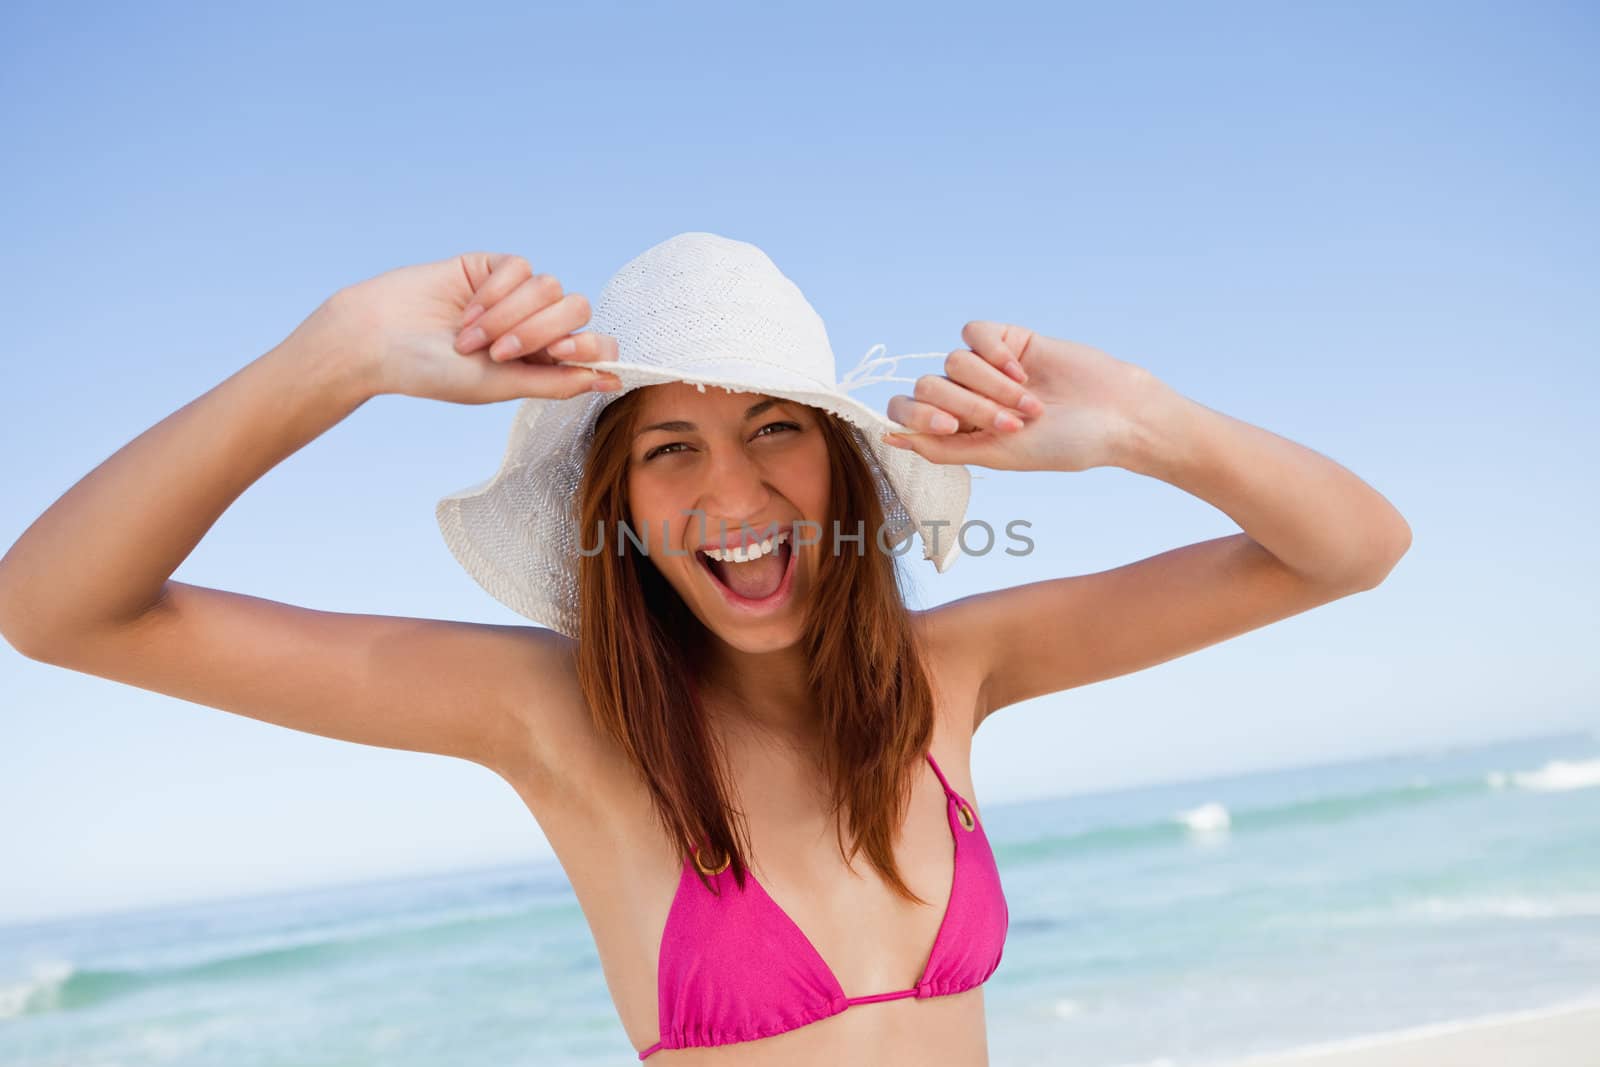 Young woman raising her arms as an indication of happiness in front of the sea